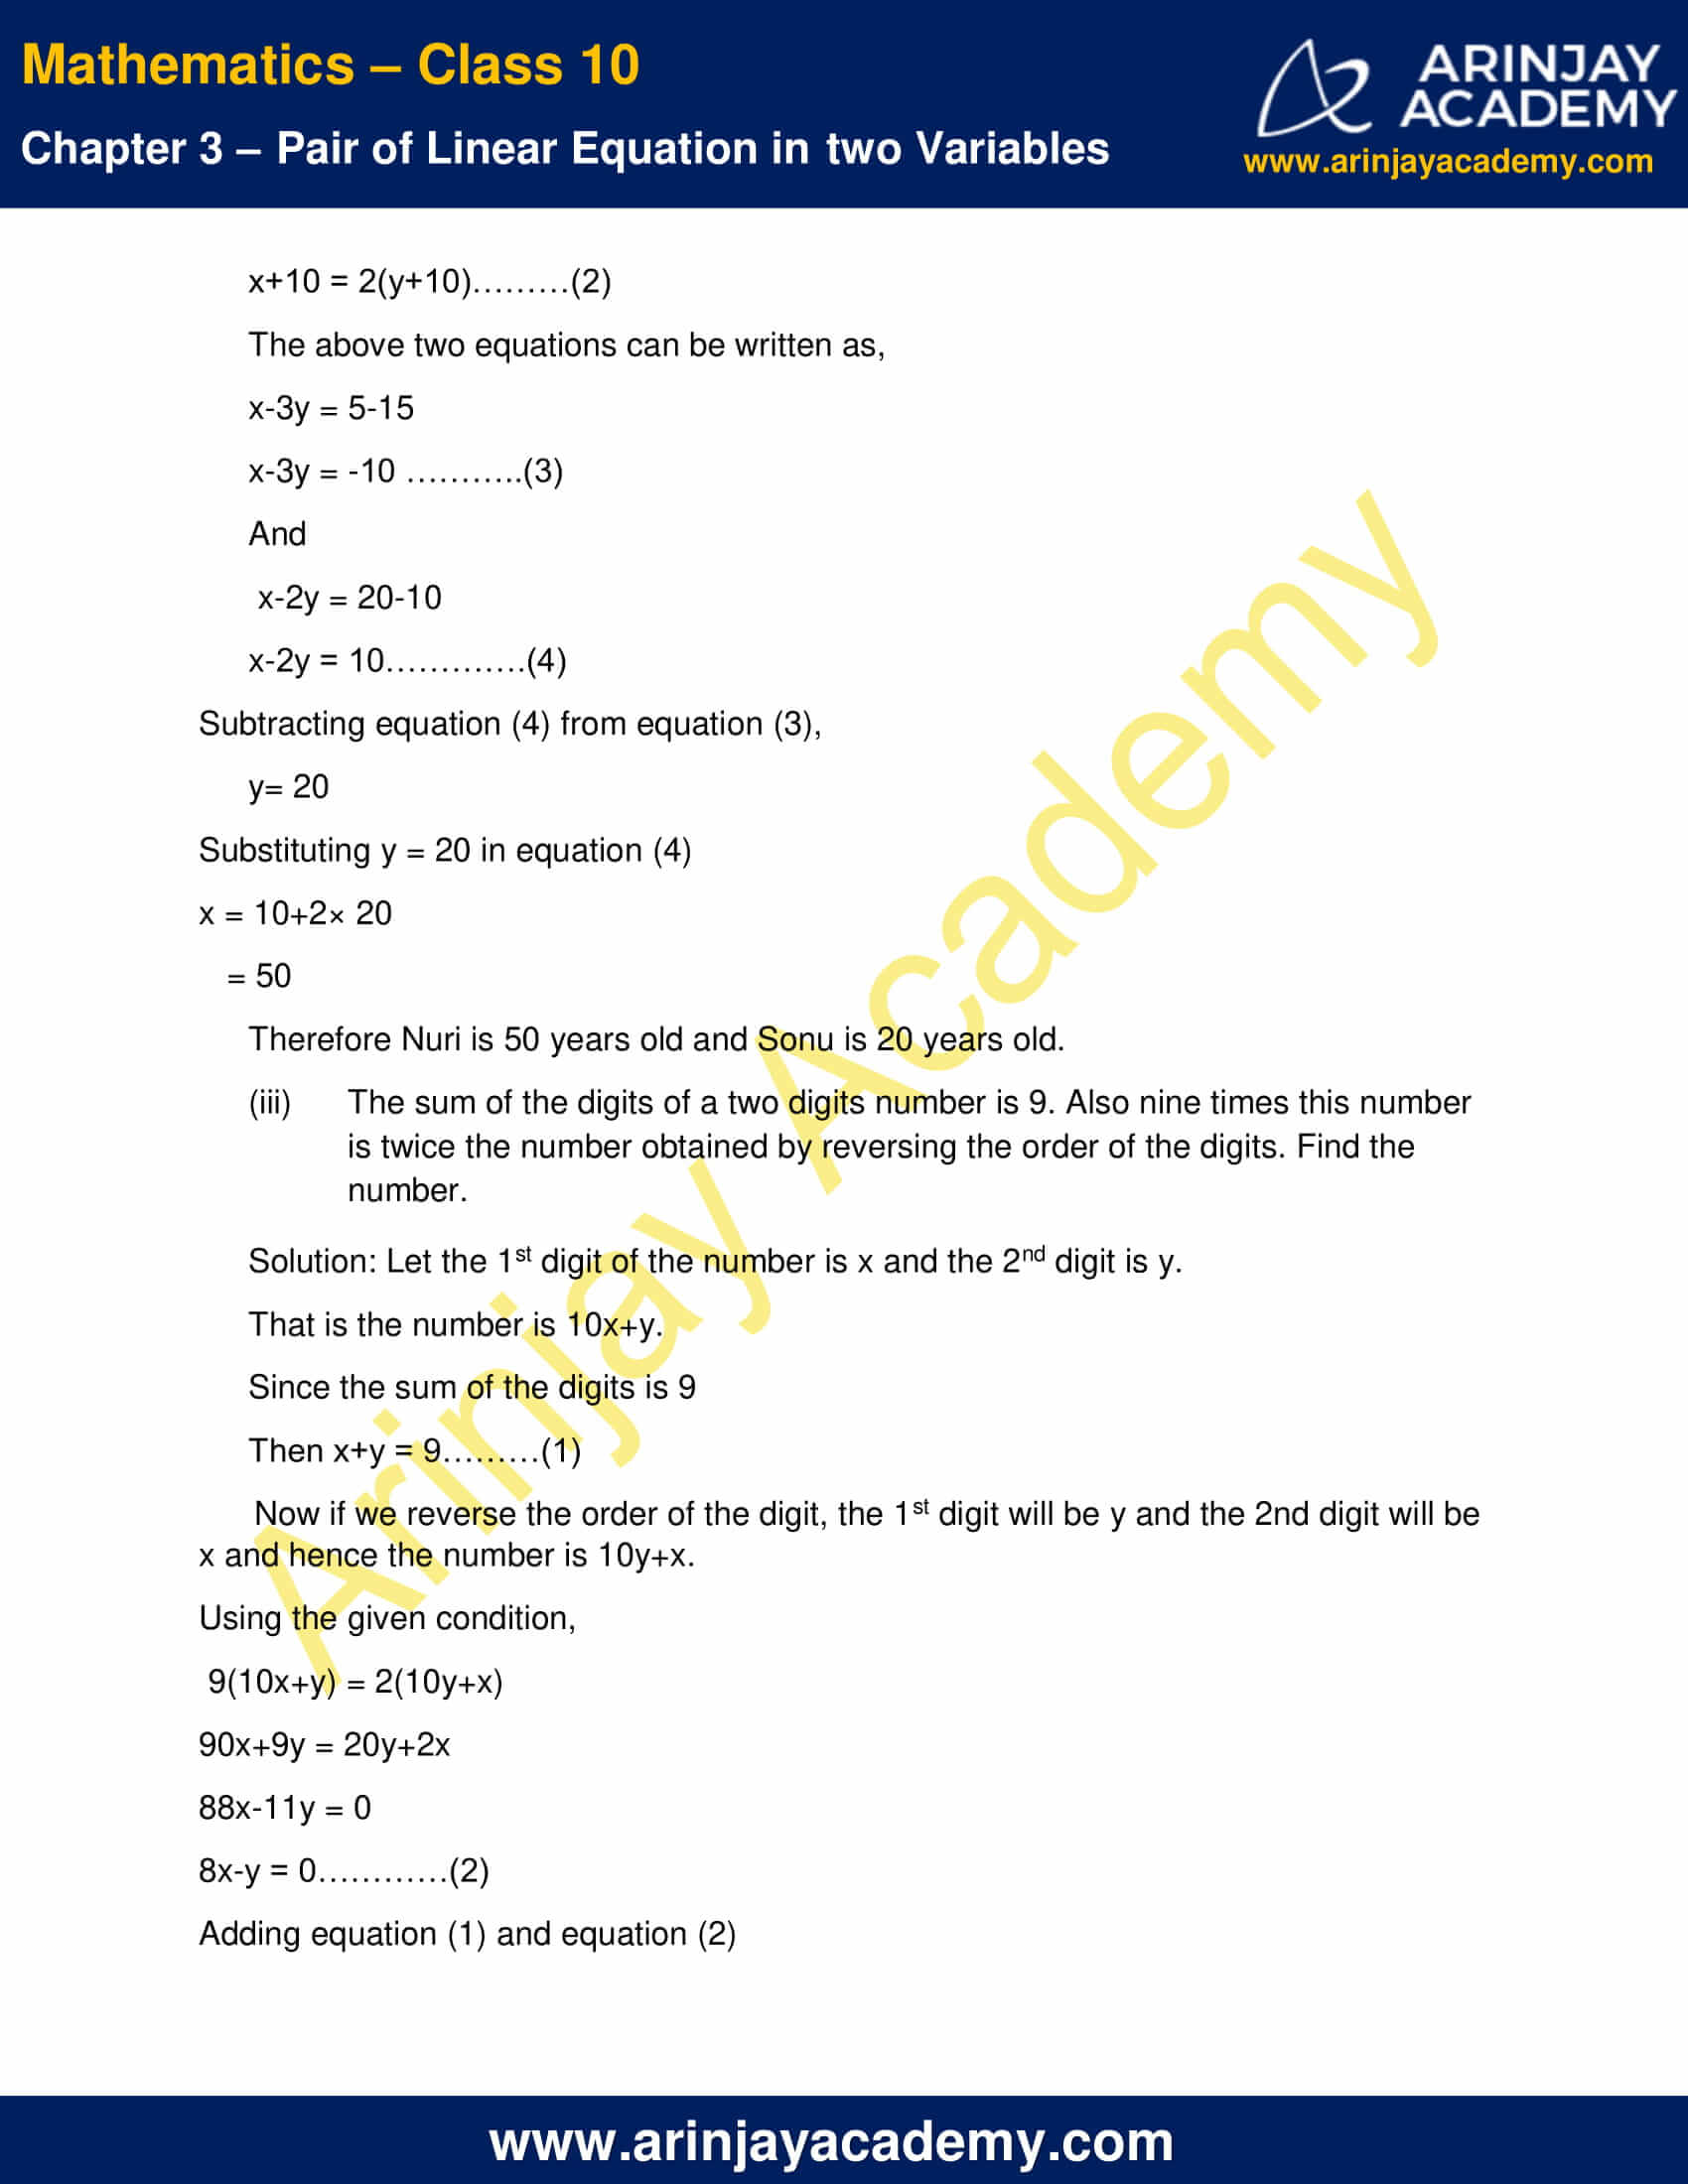 NCERT Solutions For Class 10 Maths Chapter 3 Exercise 3.4 image 7